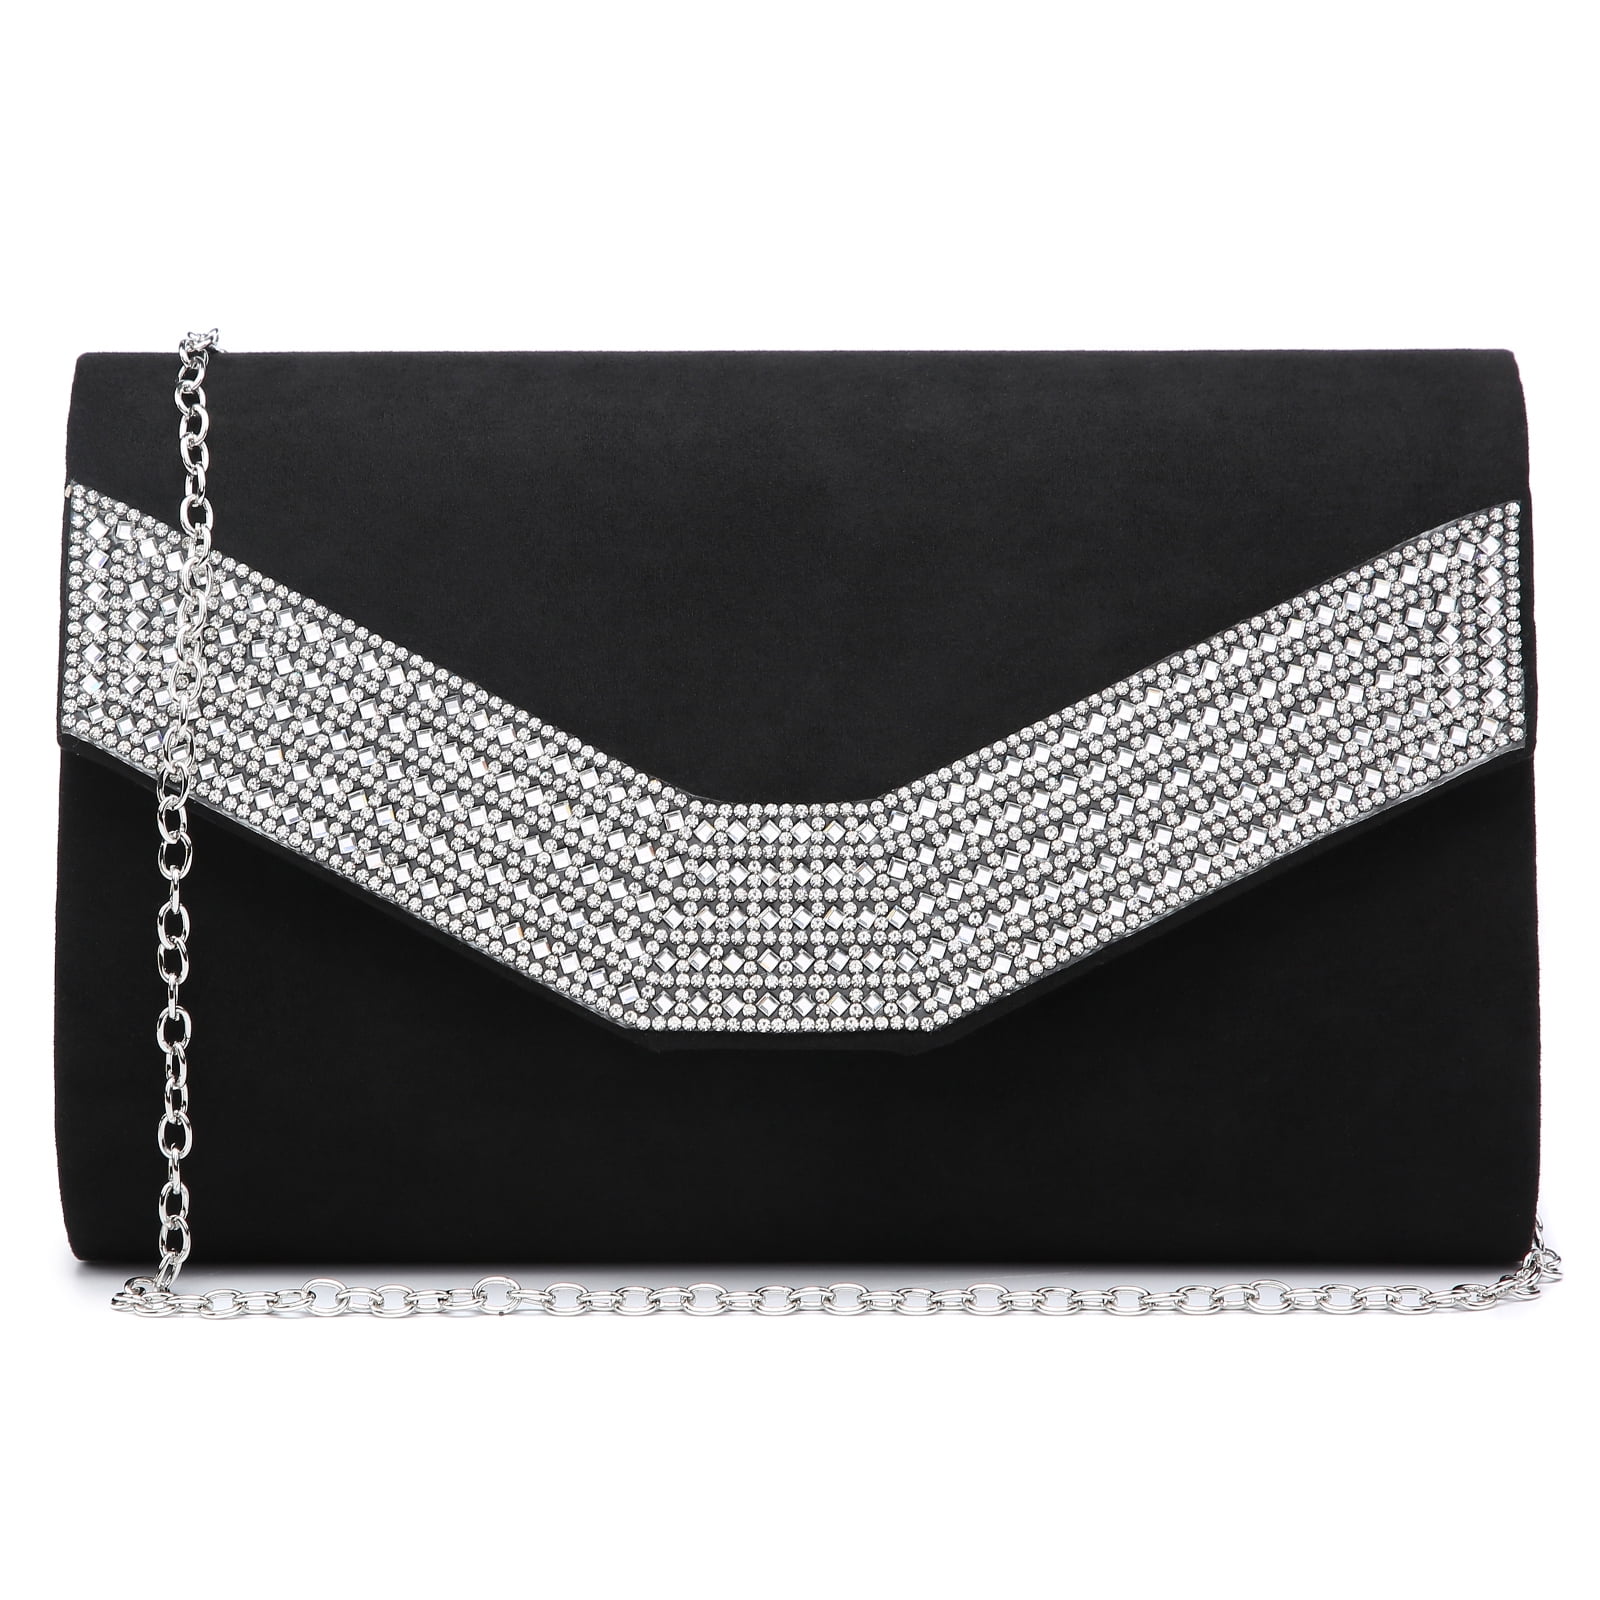 Dasein Womens Evening Clutch Bags Formal Party Clutches Wedding Purses Cocktail Prom Clutches 